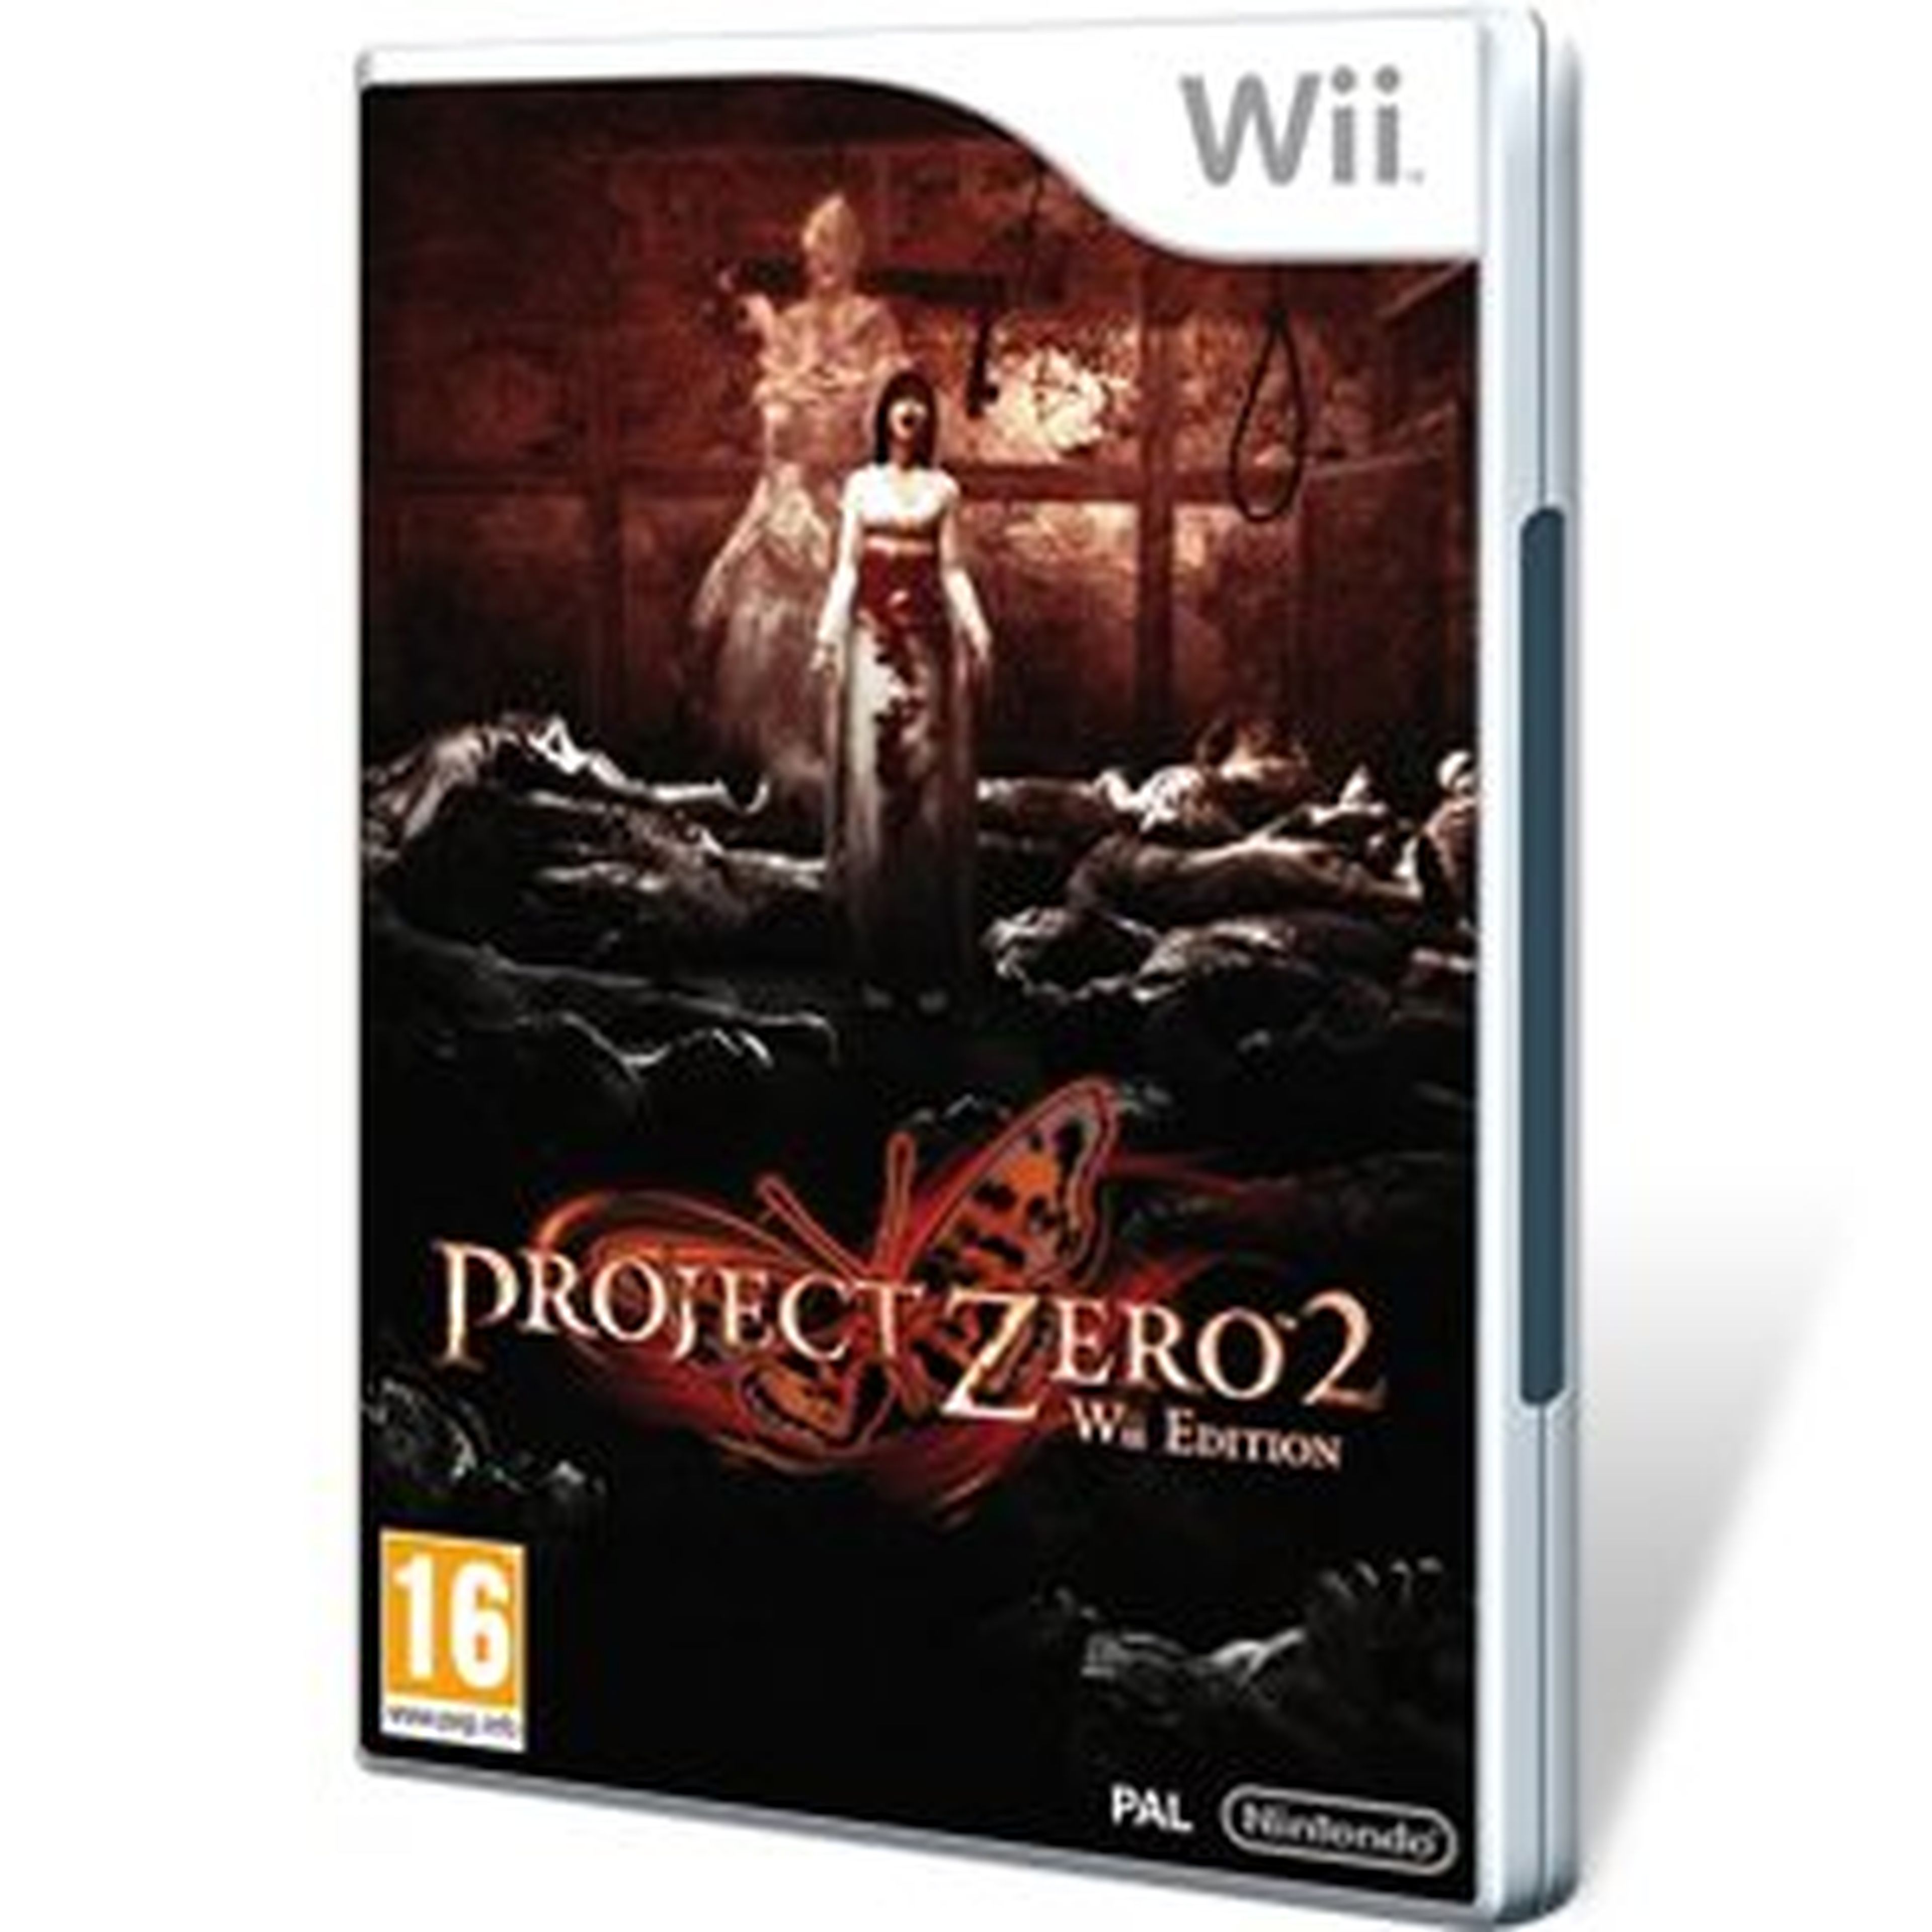 Project Zero 2 Wii Edition para Wii